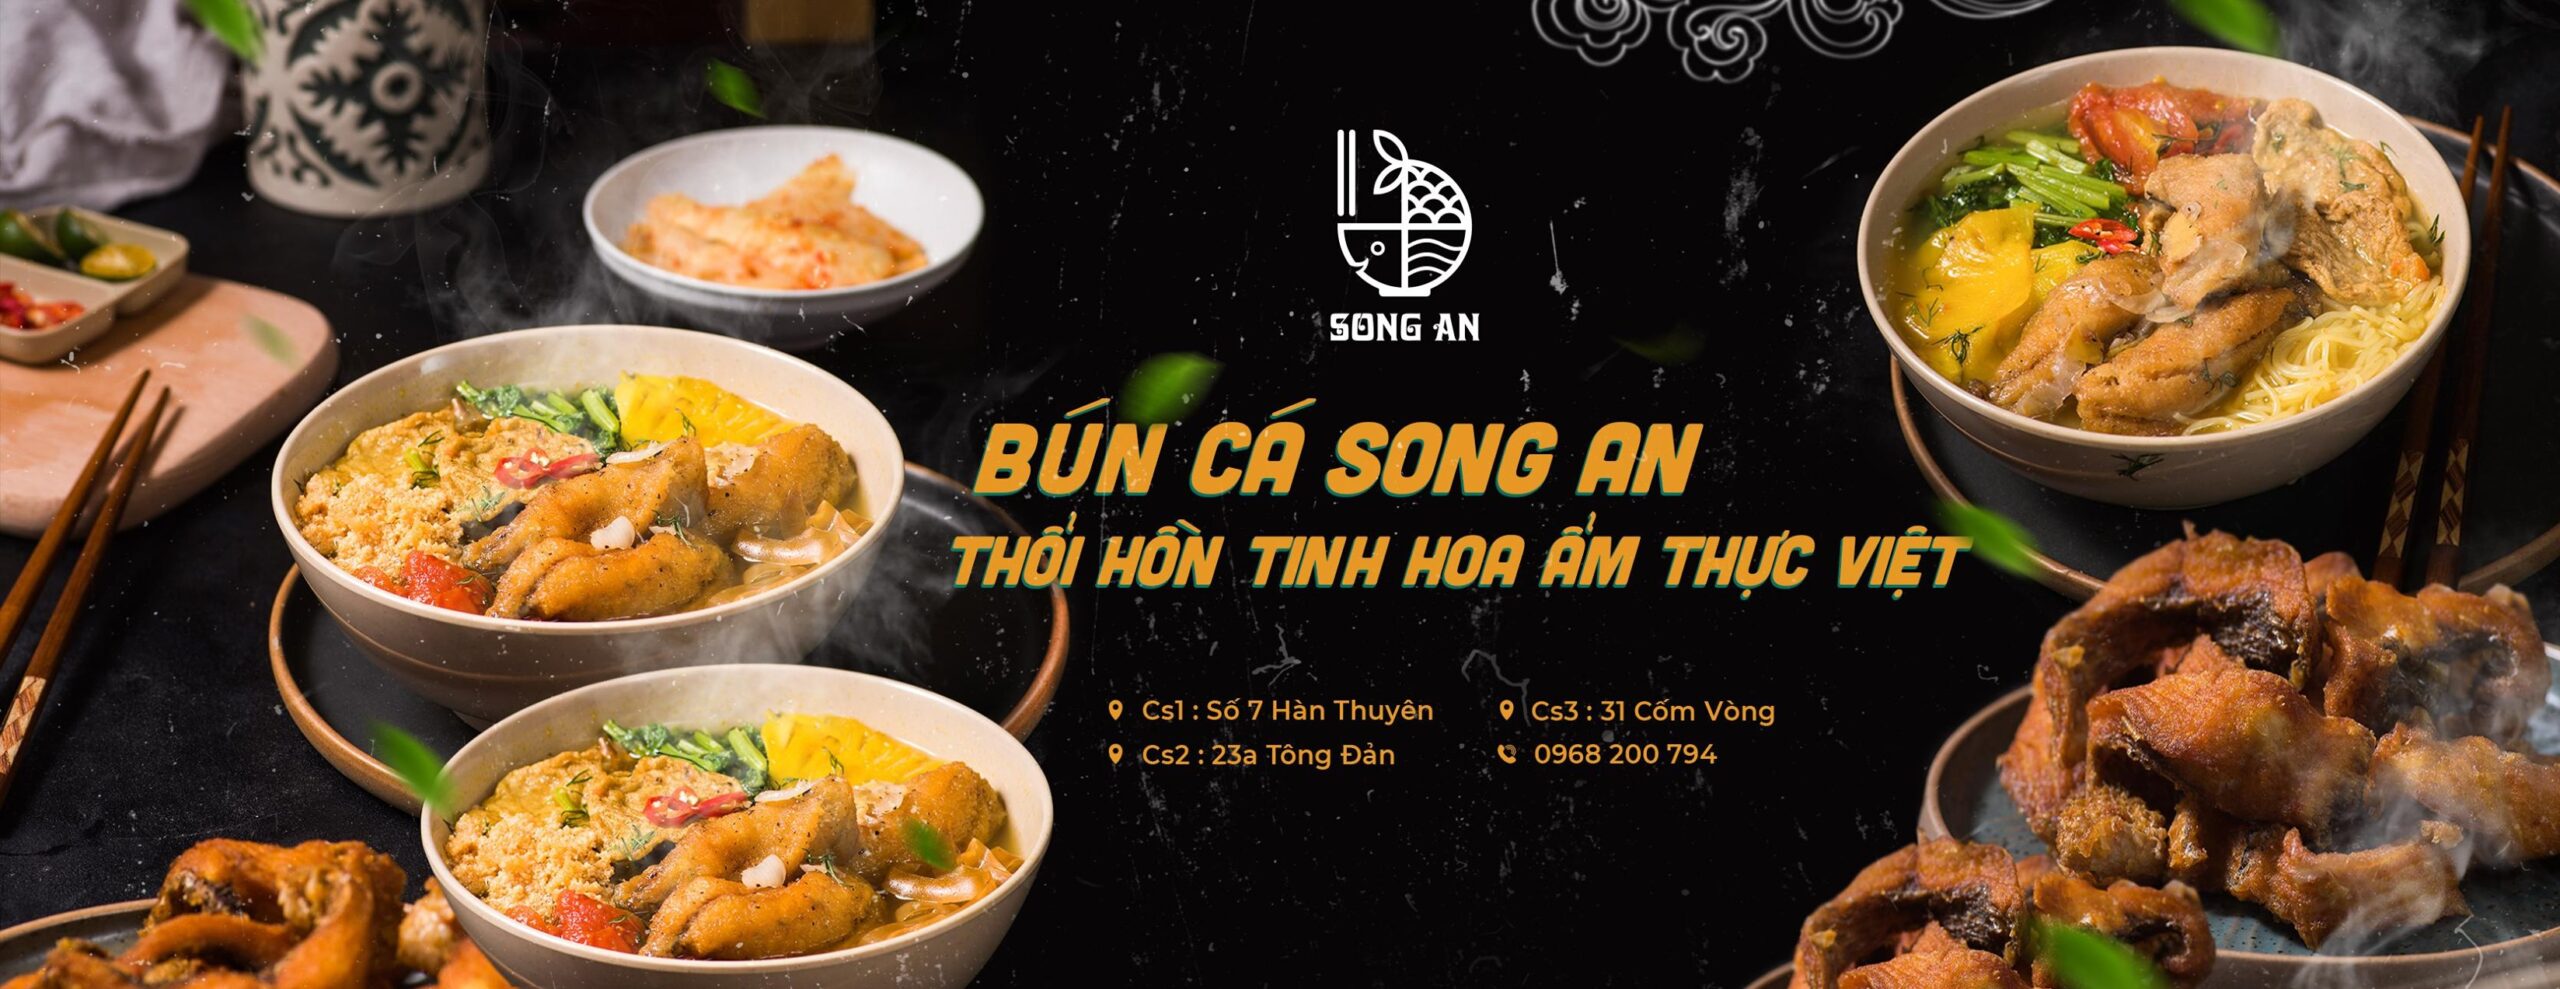 song an fish noodle